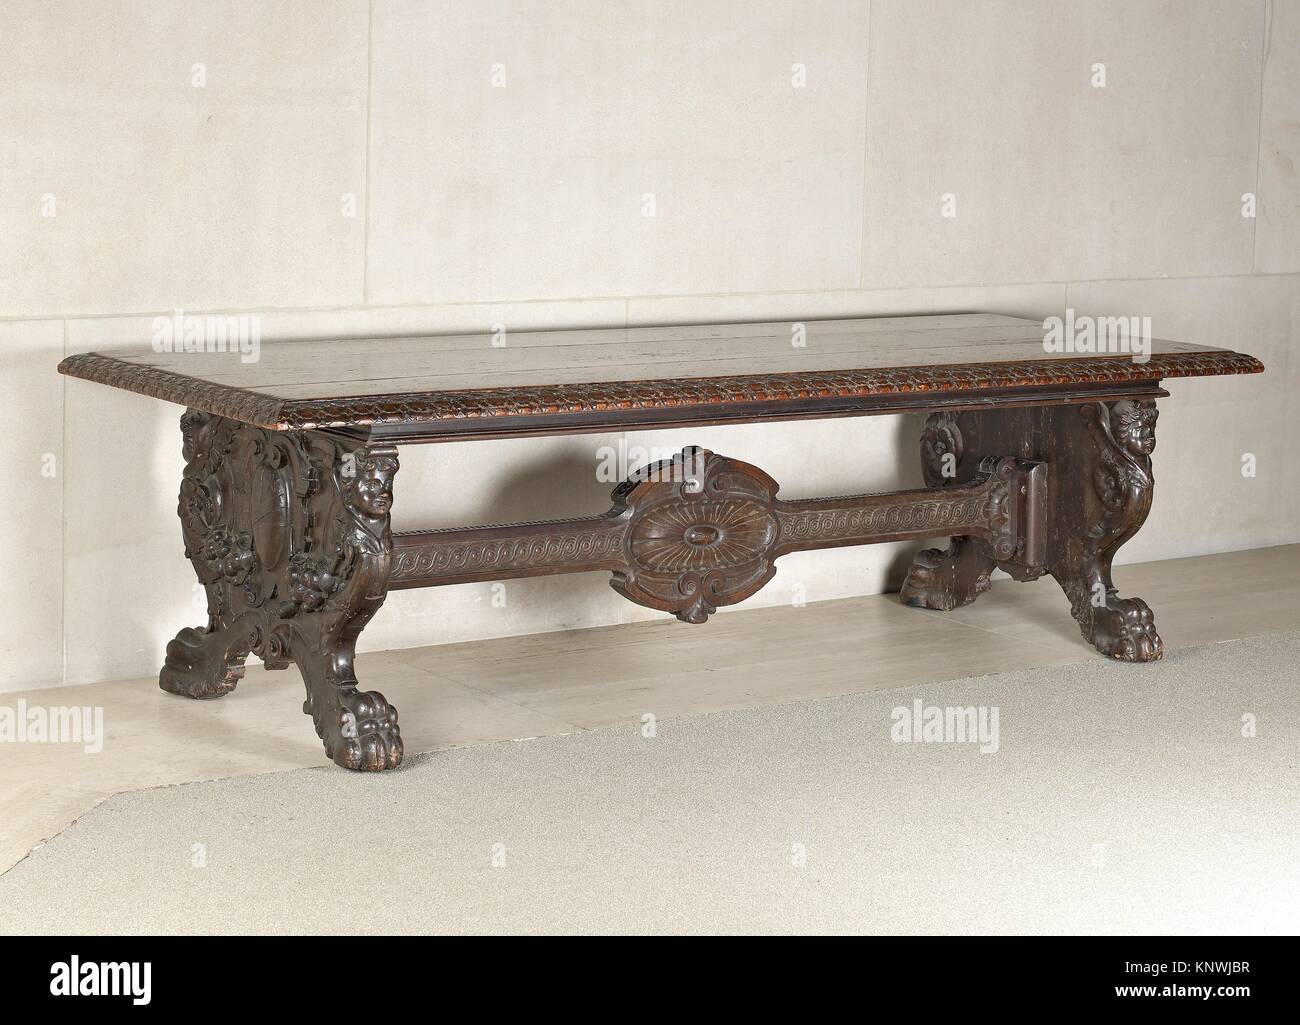 Center table. Date: 19th century, second half or early 20th century; Culture: Italian; Medium: Walnut, carved; Dimensions: H. 76.2 cm, W. 279.6 cm, Stock Photo